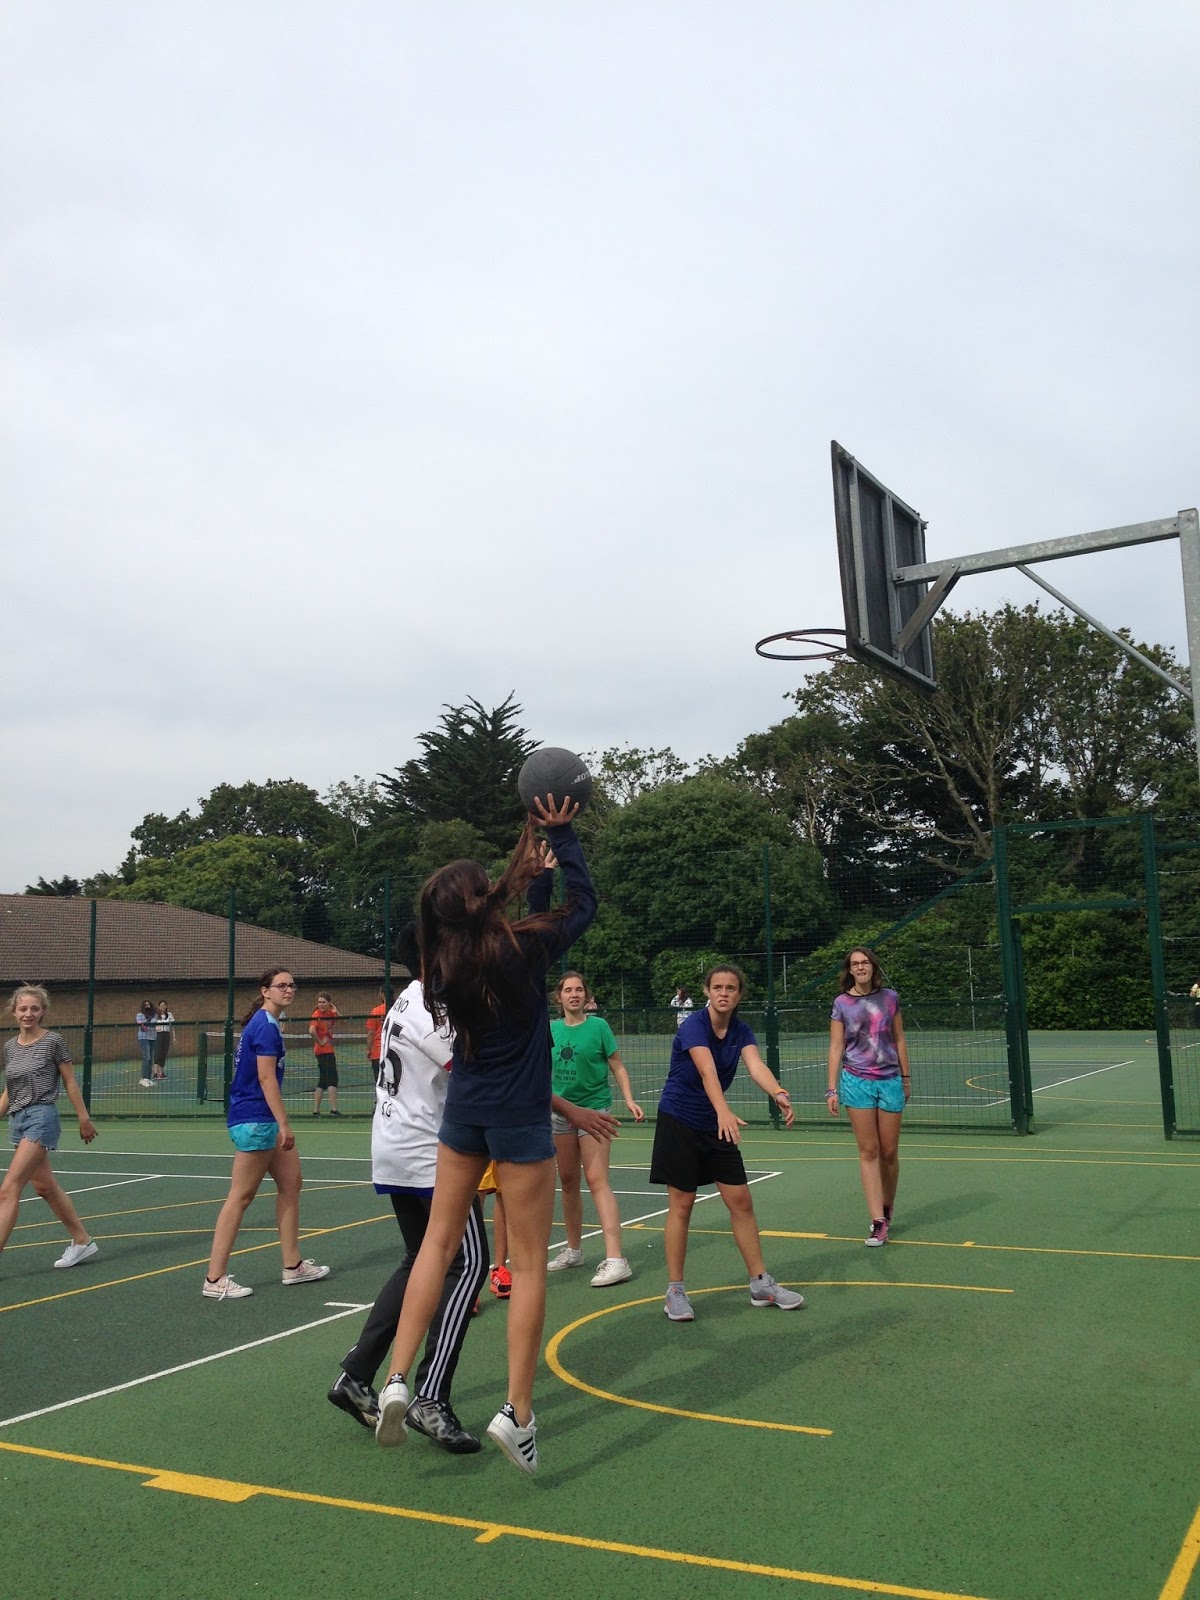 Live from Bournemouth - Southbourne School of English: Beatboxing, basketball, tennis ...